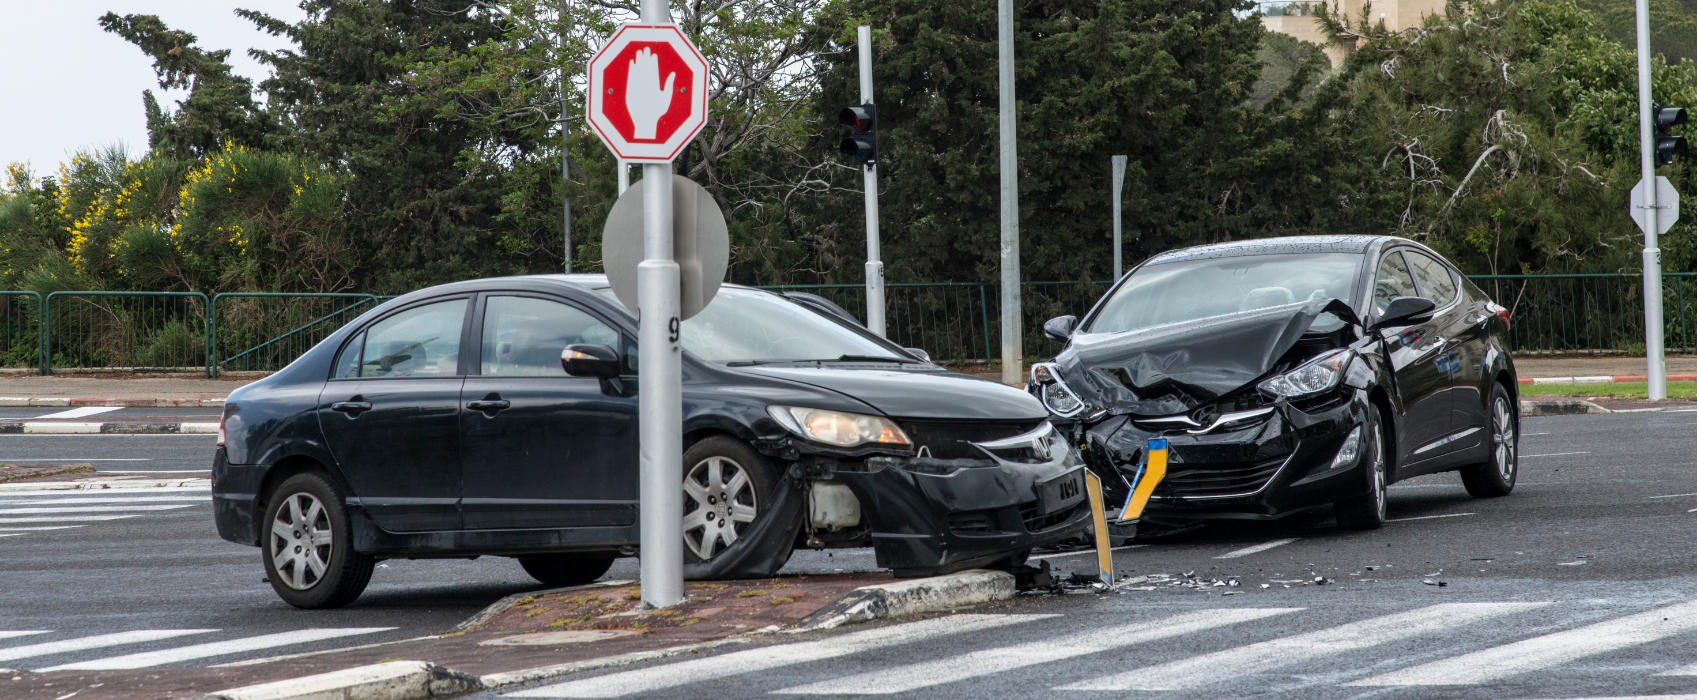 car accident at an intersection, Macon car accident lawyers | Car accident attorneys in Macon GA